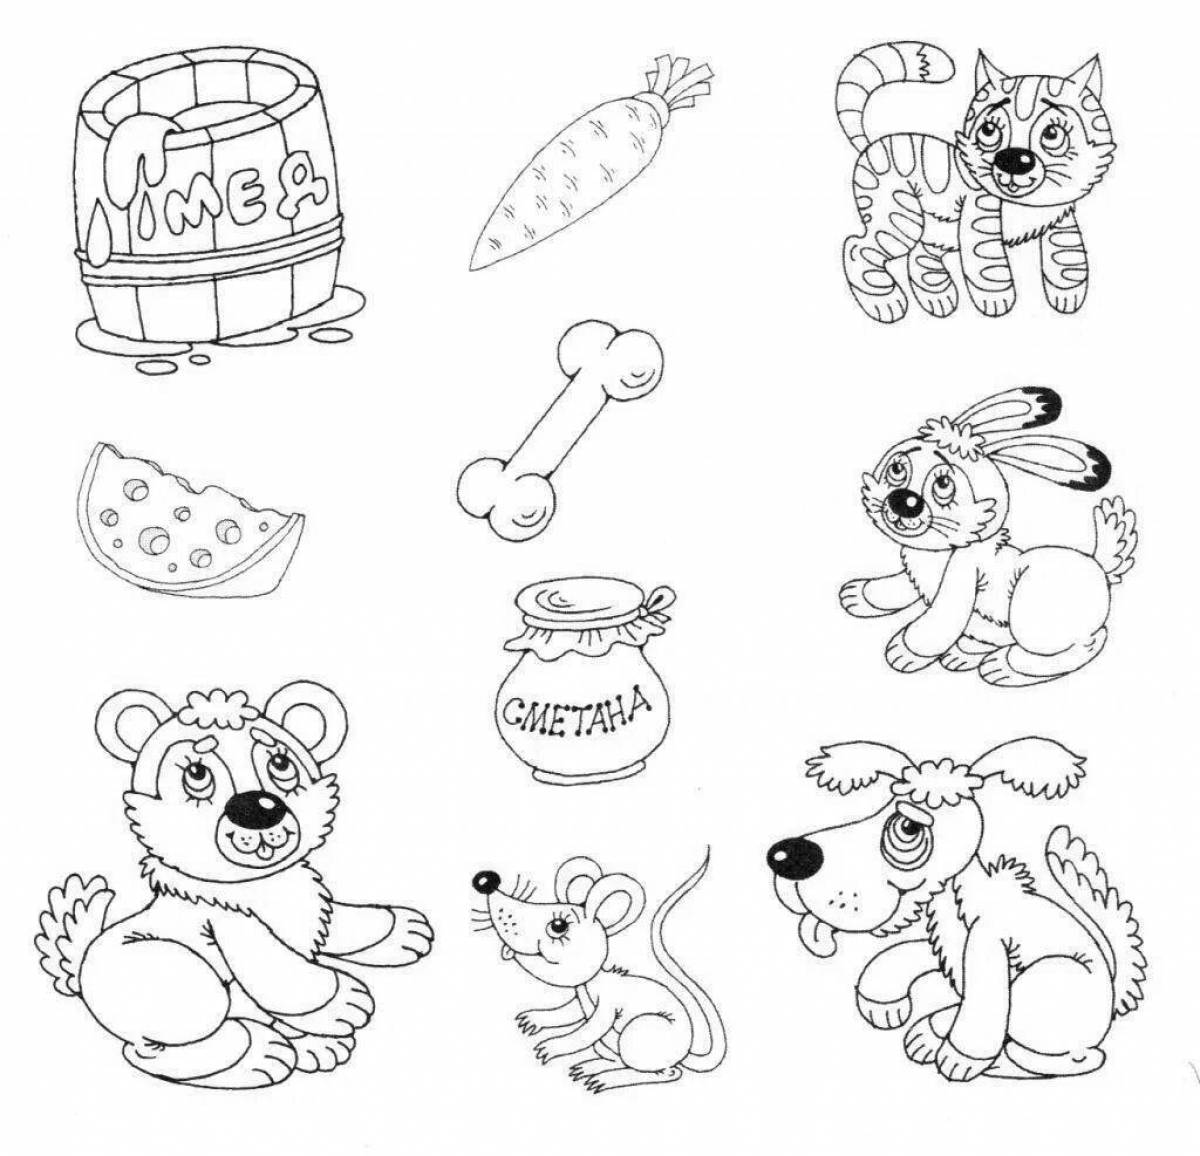 Funny halyk coloring book for kids